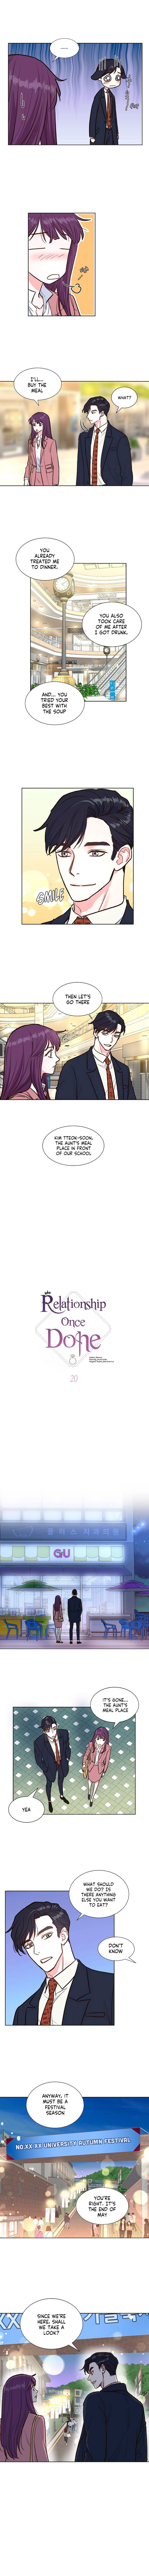 Relationship Once Done Chapter 20 page 4